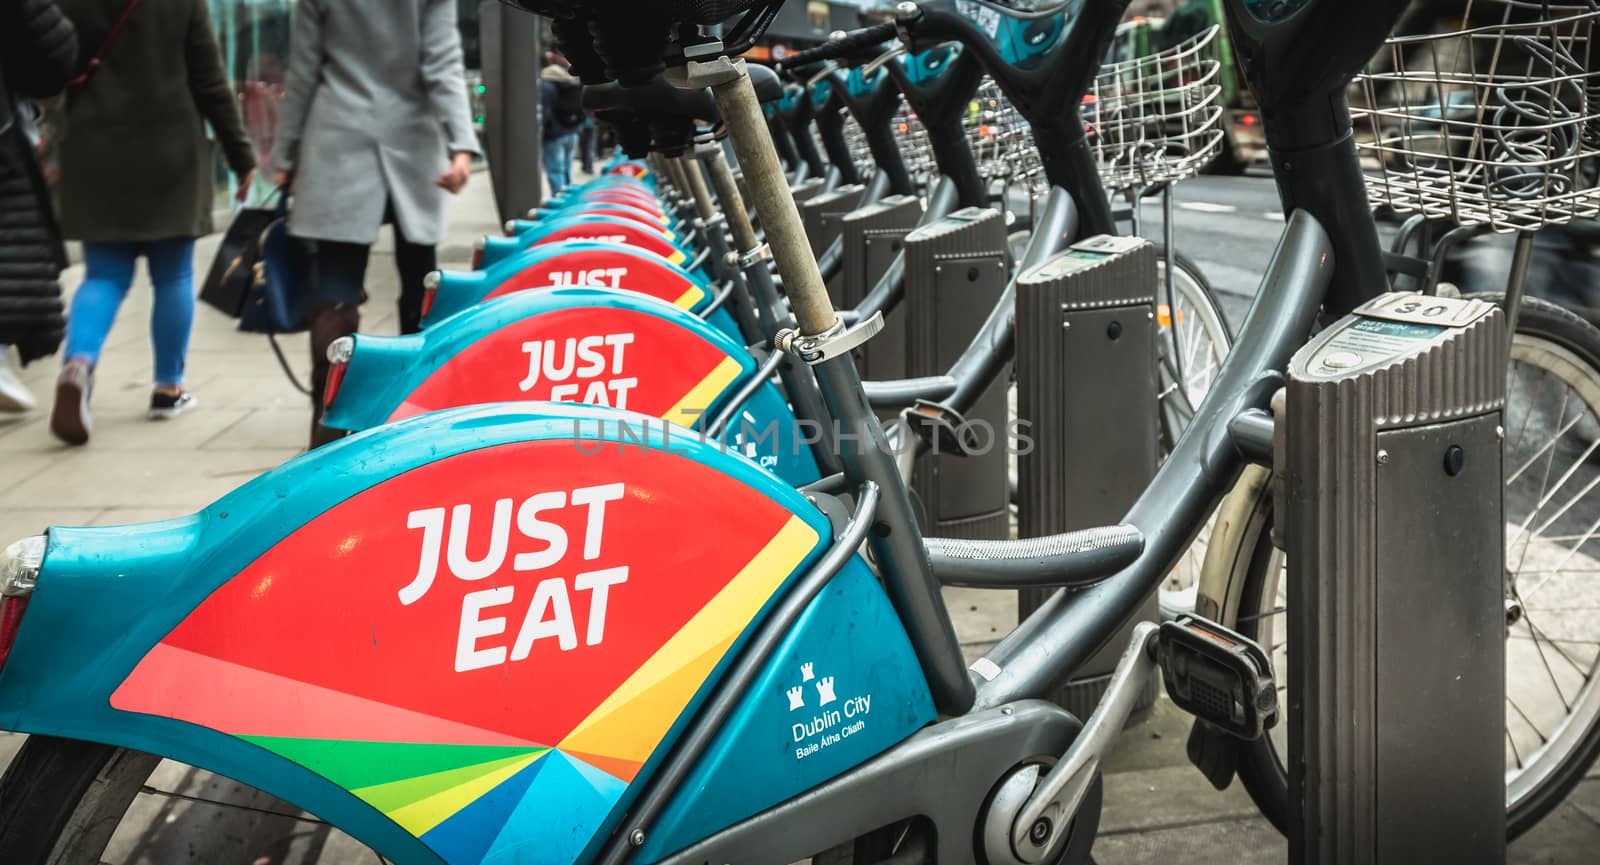 Dublin, Ireland - February 11, 2019: Detail of a shared public bike station Just Eat dublinbikes in the city center on a winter day